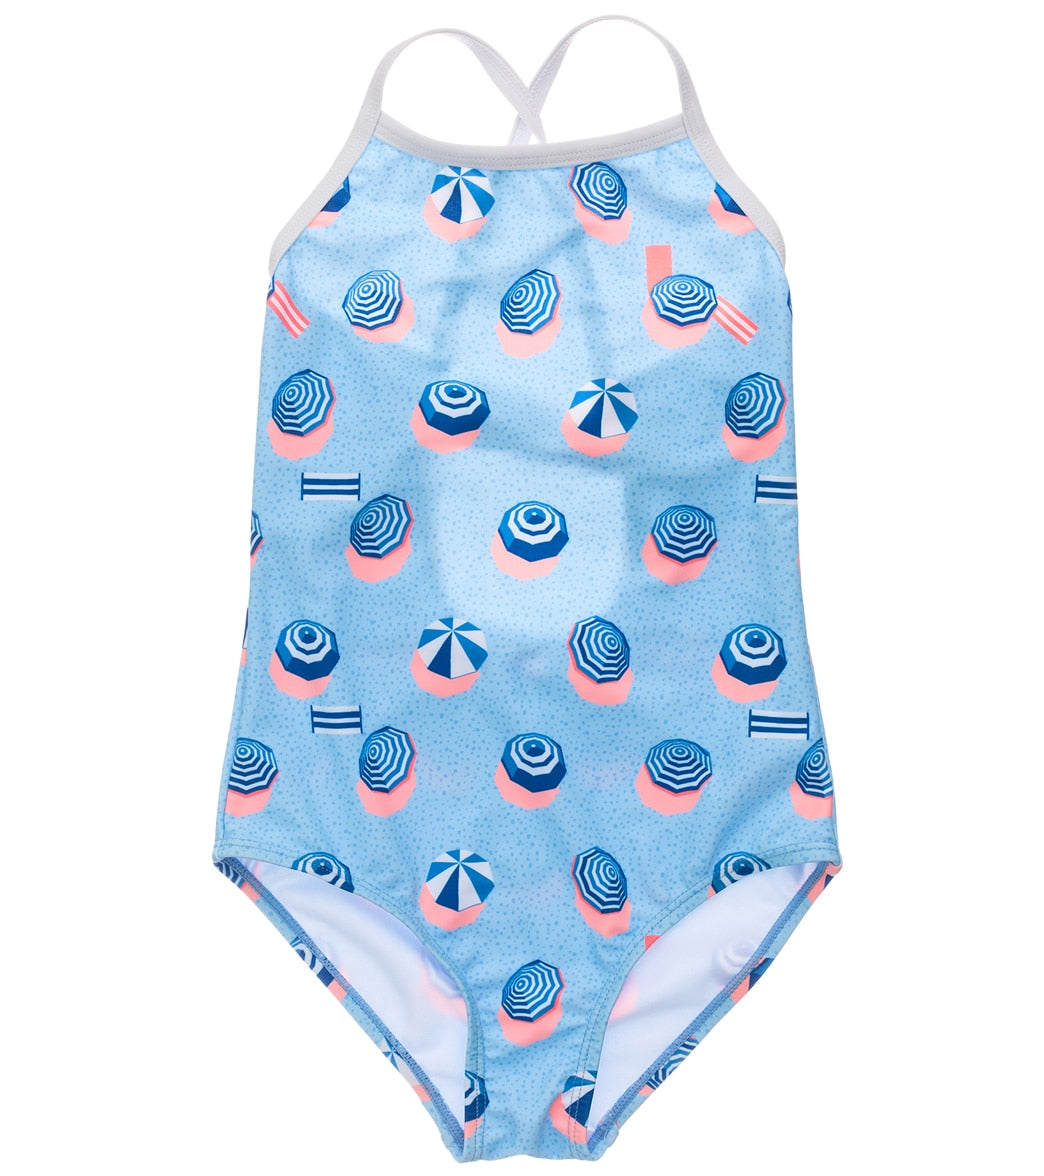 Snapper Rock Girls' French Riviera X Back Tie One Piece Swimsuit - Blue 10 Elastane/Polyamide - Swimoutlet.com